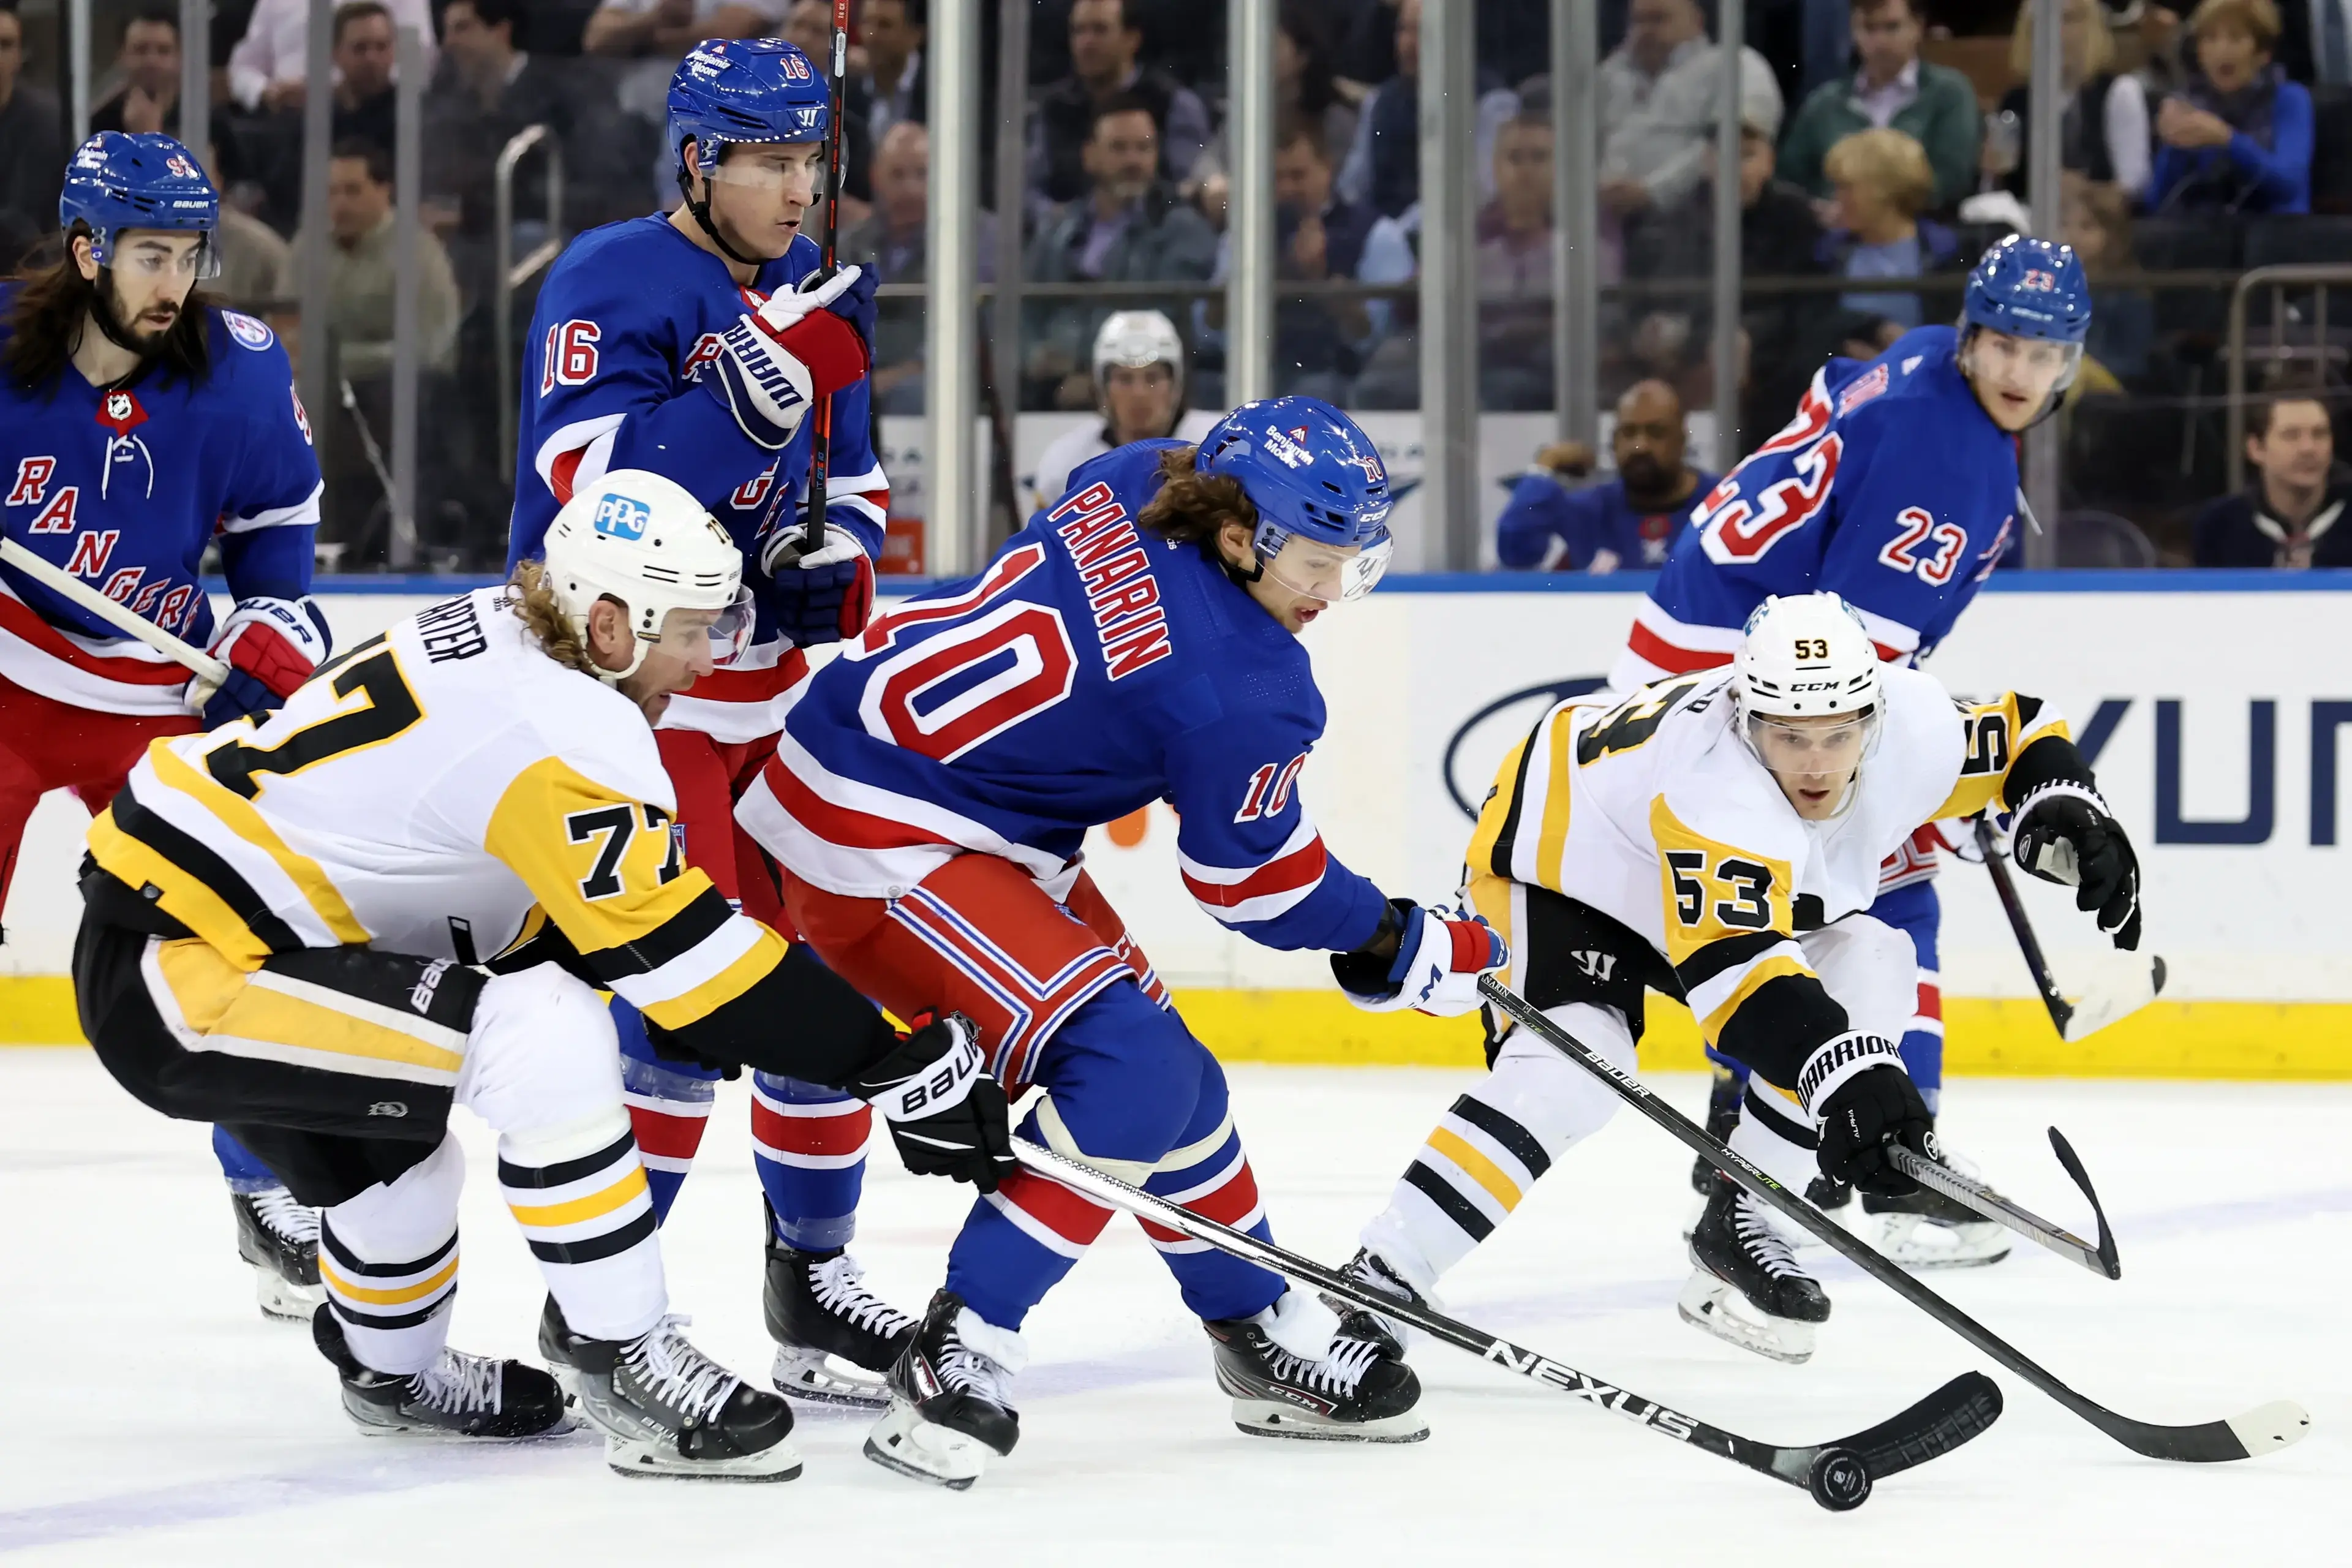 Apr 7, 2022; New York, New York, USA; New York Rangers left wing Artemi Panarin (10) fights for the puck against Pittsburgh Penguins center Jeff Carter (77) and center Teddy Blueger (53) during the first period at Madison Square Garden. Mandatory Credit: Brad Penner-USA TODAY Sports / © Brad Penner-USA TODAY Sports